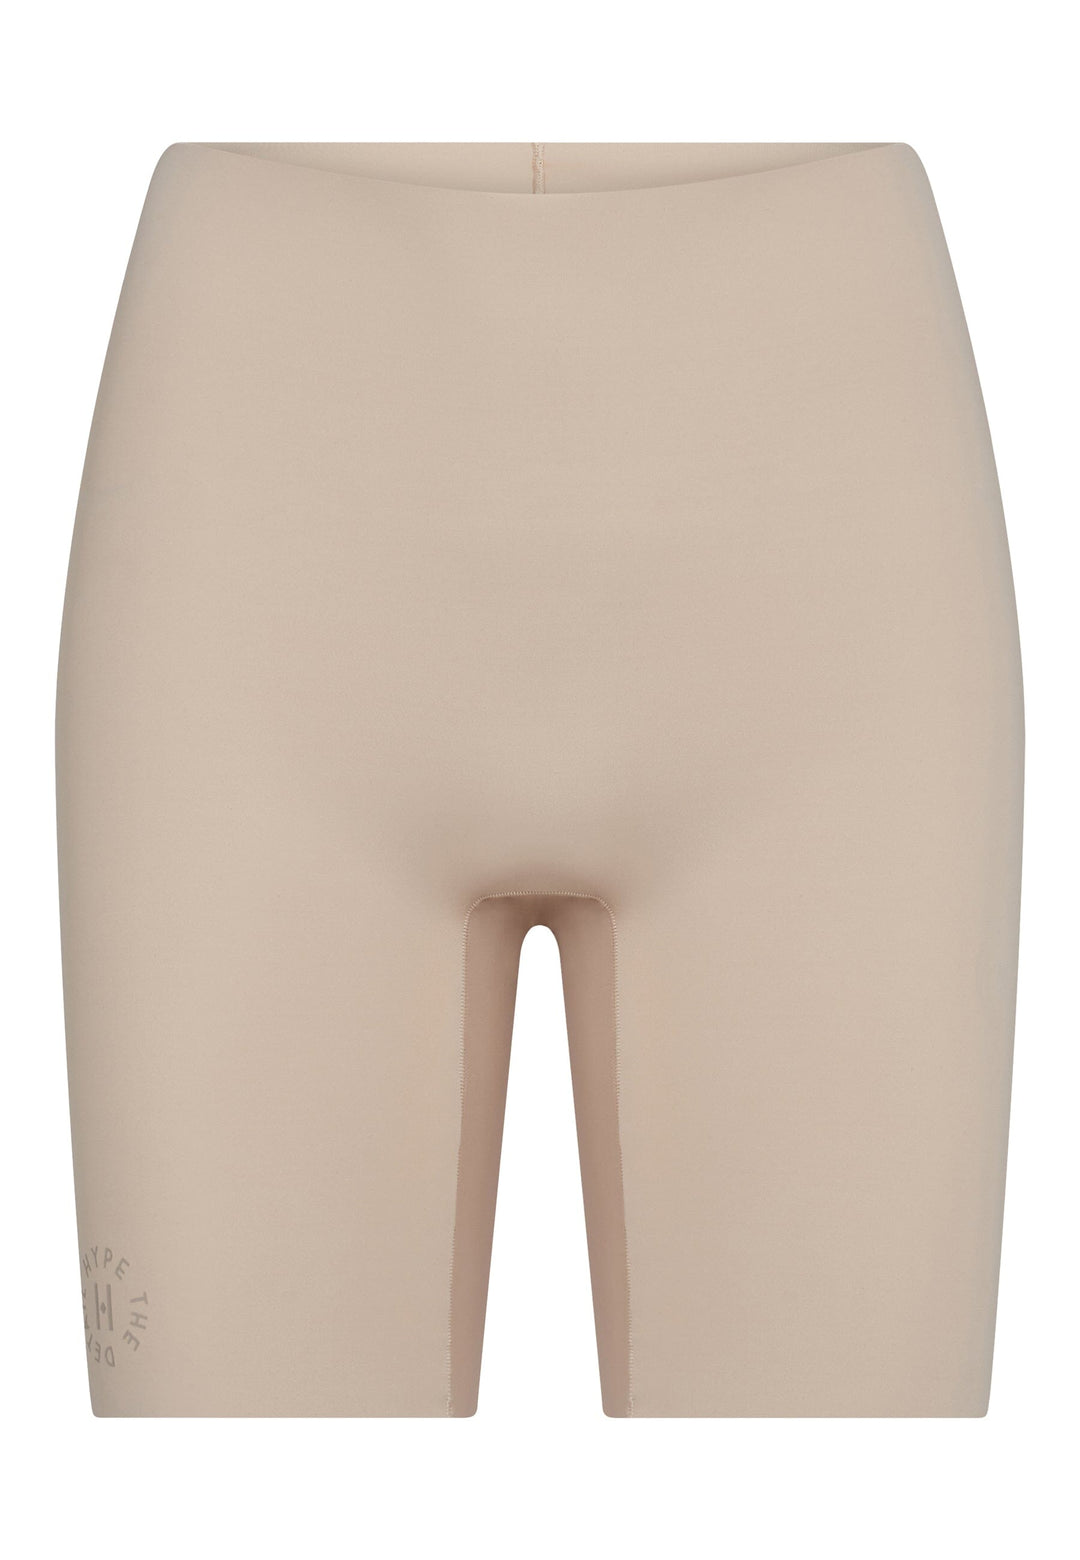 Hype The Detail - Shorts - 81 Sand Shorts 